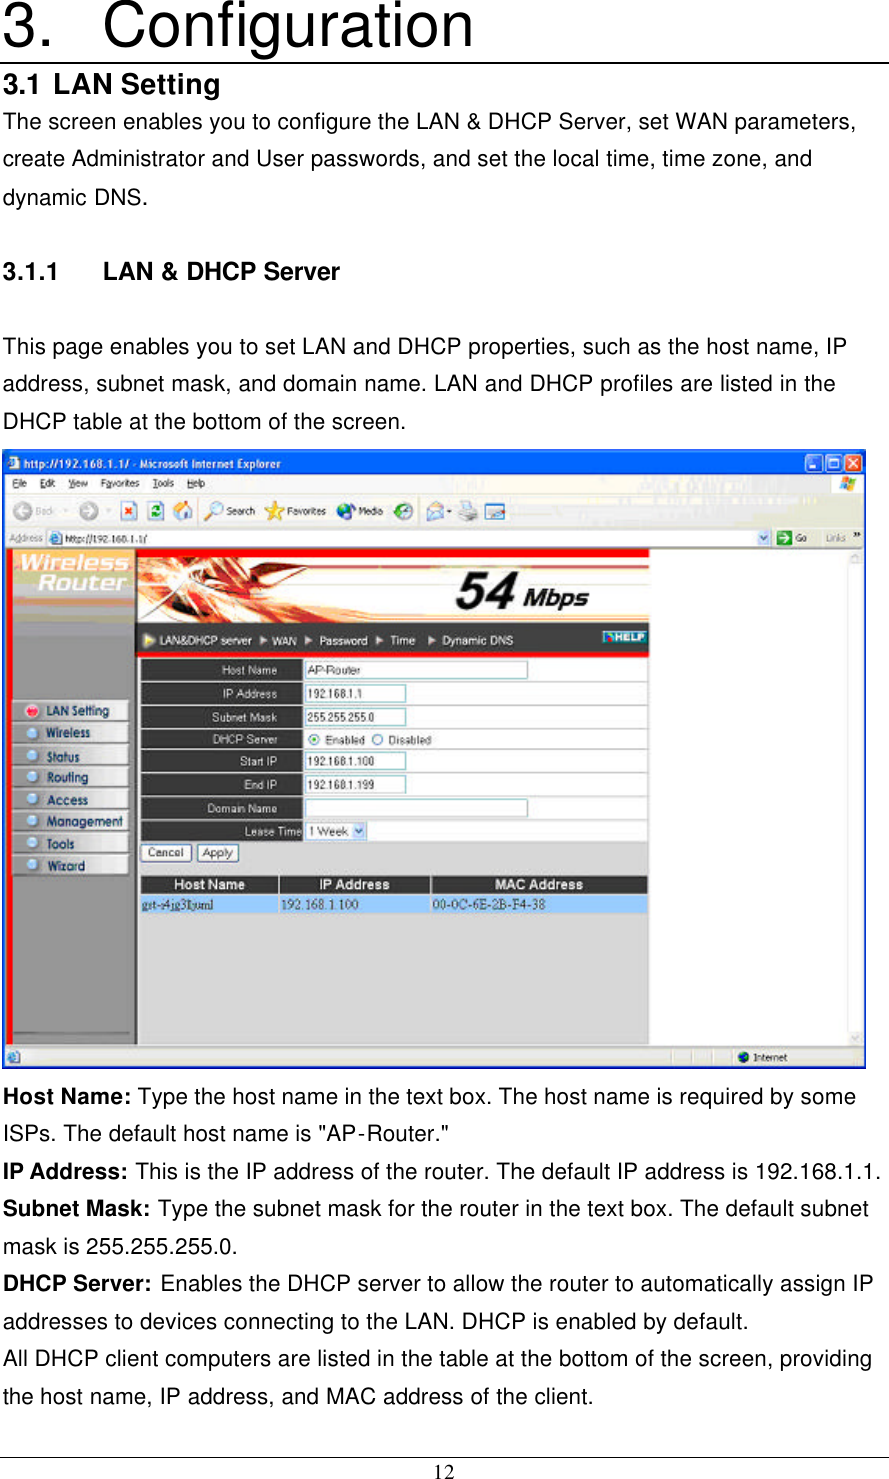 12 3. Configuration 3.1 LAN Setting The screen enables you to configure the LAN &amp; DHCP Server, set WAN parameters, create Administrator and User passwords, and set the local time, time zone, and dynamic DNS. 3.1.1 LAN &amp; DHCP Server This page enables you to set LAN and DHCP properties, such as the host name, IP address, subnet mask, and domain name. LAN and DHCP profiles are listed in the DHCP table at the bottom of the screen.  Host Name: Type the host name in the text box. The host name is required by some ISPs. The default host name is &quot;AP-Router.&quot; IP Address: This is the IP address of the router. The default IP address is 192.168.1.1. Subnet Mask: Type the subnet mask for the router in the text box. The default subnet mask is 255.255.255.0. DHCP Server: Enables the DHCP server to allow the router to automatically assign IP addresses to devices connecting to the LAN. DHCP is enabled by default. All DHCP client computers are listed in the table at the bottom of the screen, providing the host name, IP address, and MAC address of the client. 